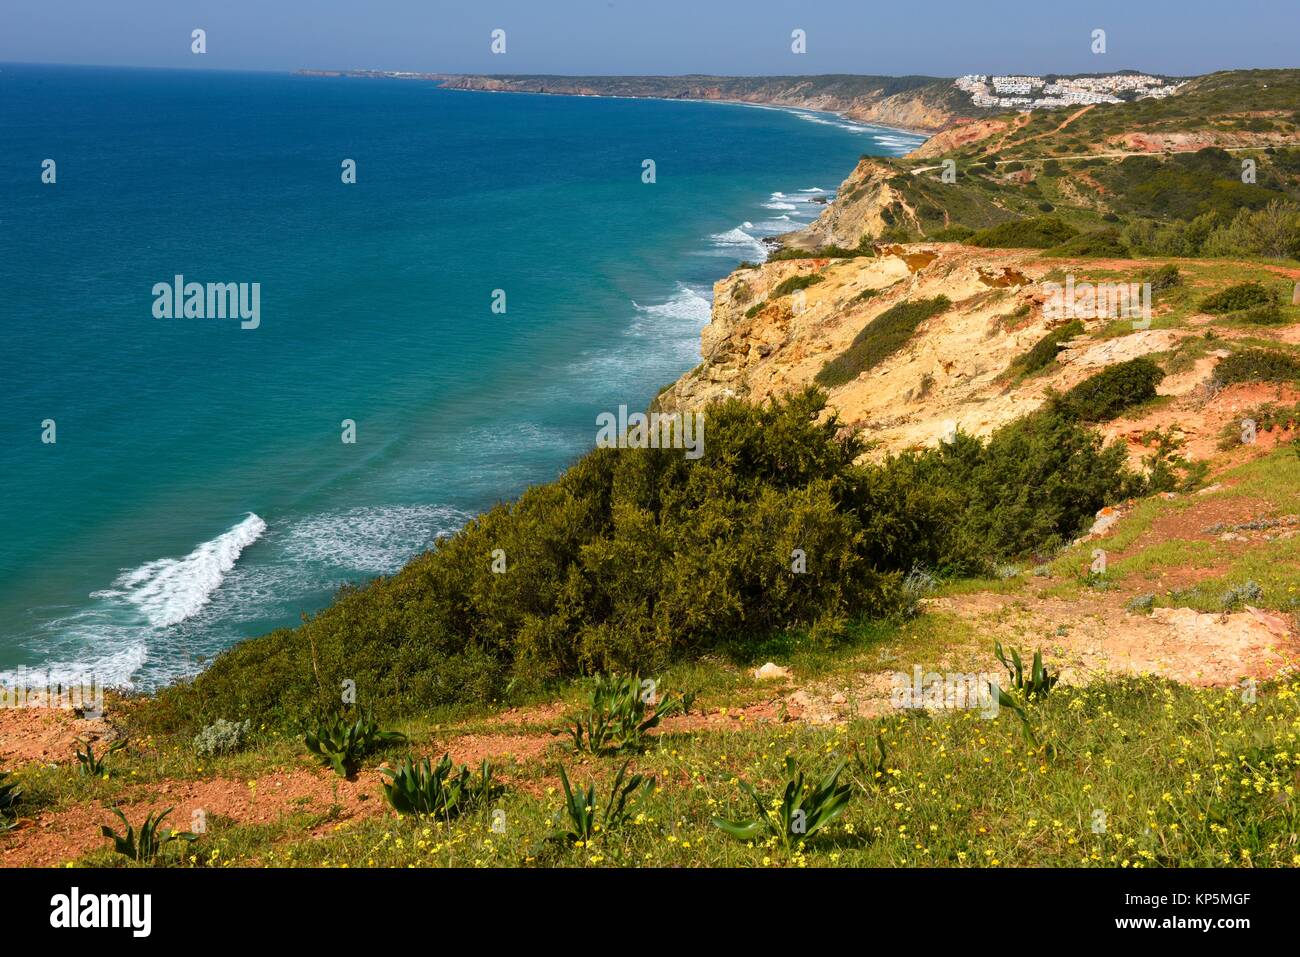 Rock formations at the Atlantic Coast in Algarve, Portugal. Stock Photo